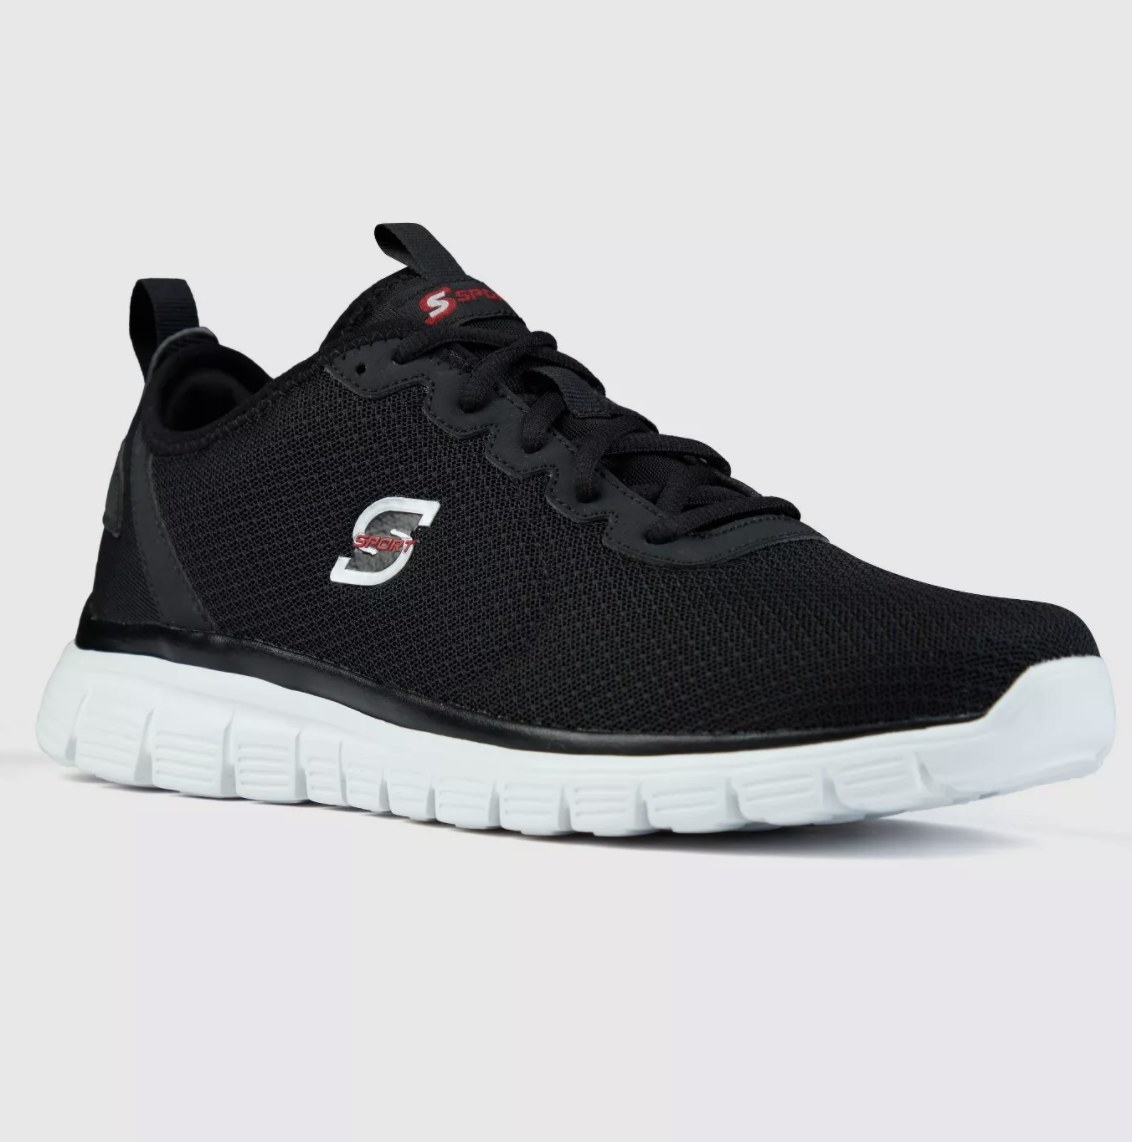 The black sneakers have a white chunky sole and a white S with &quot;SPORT&quot; written in red on the side